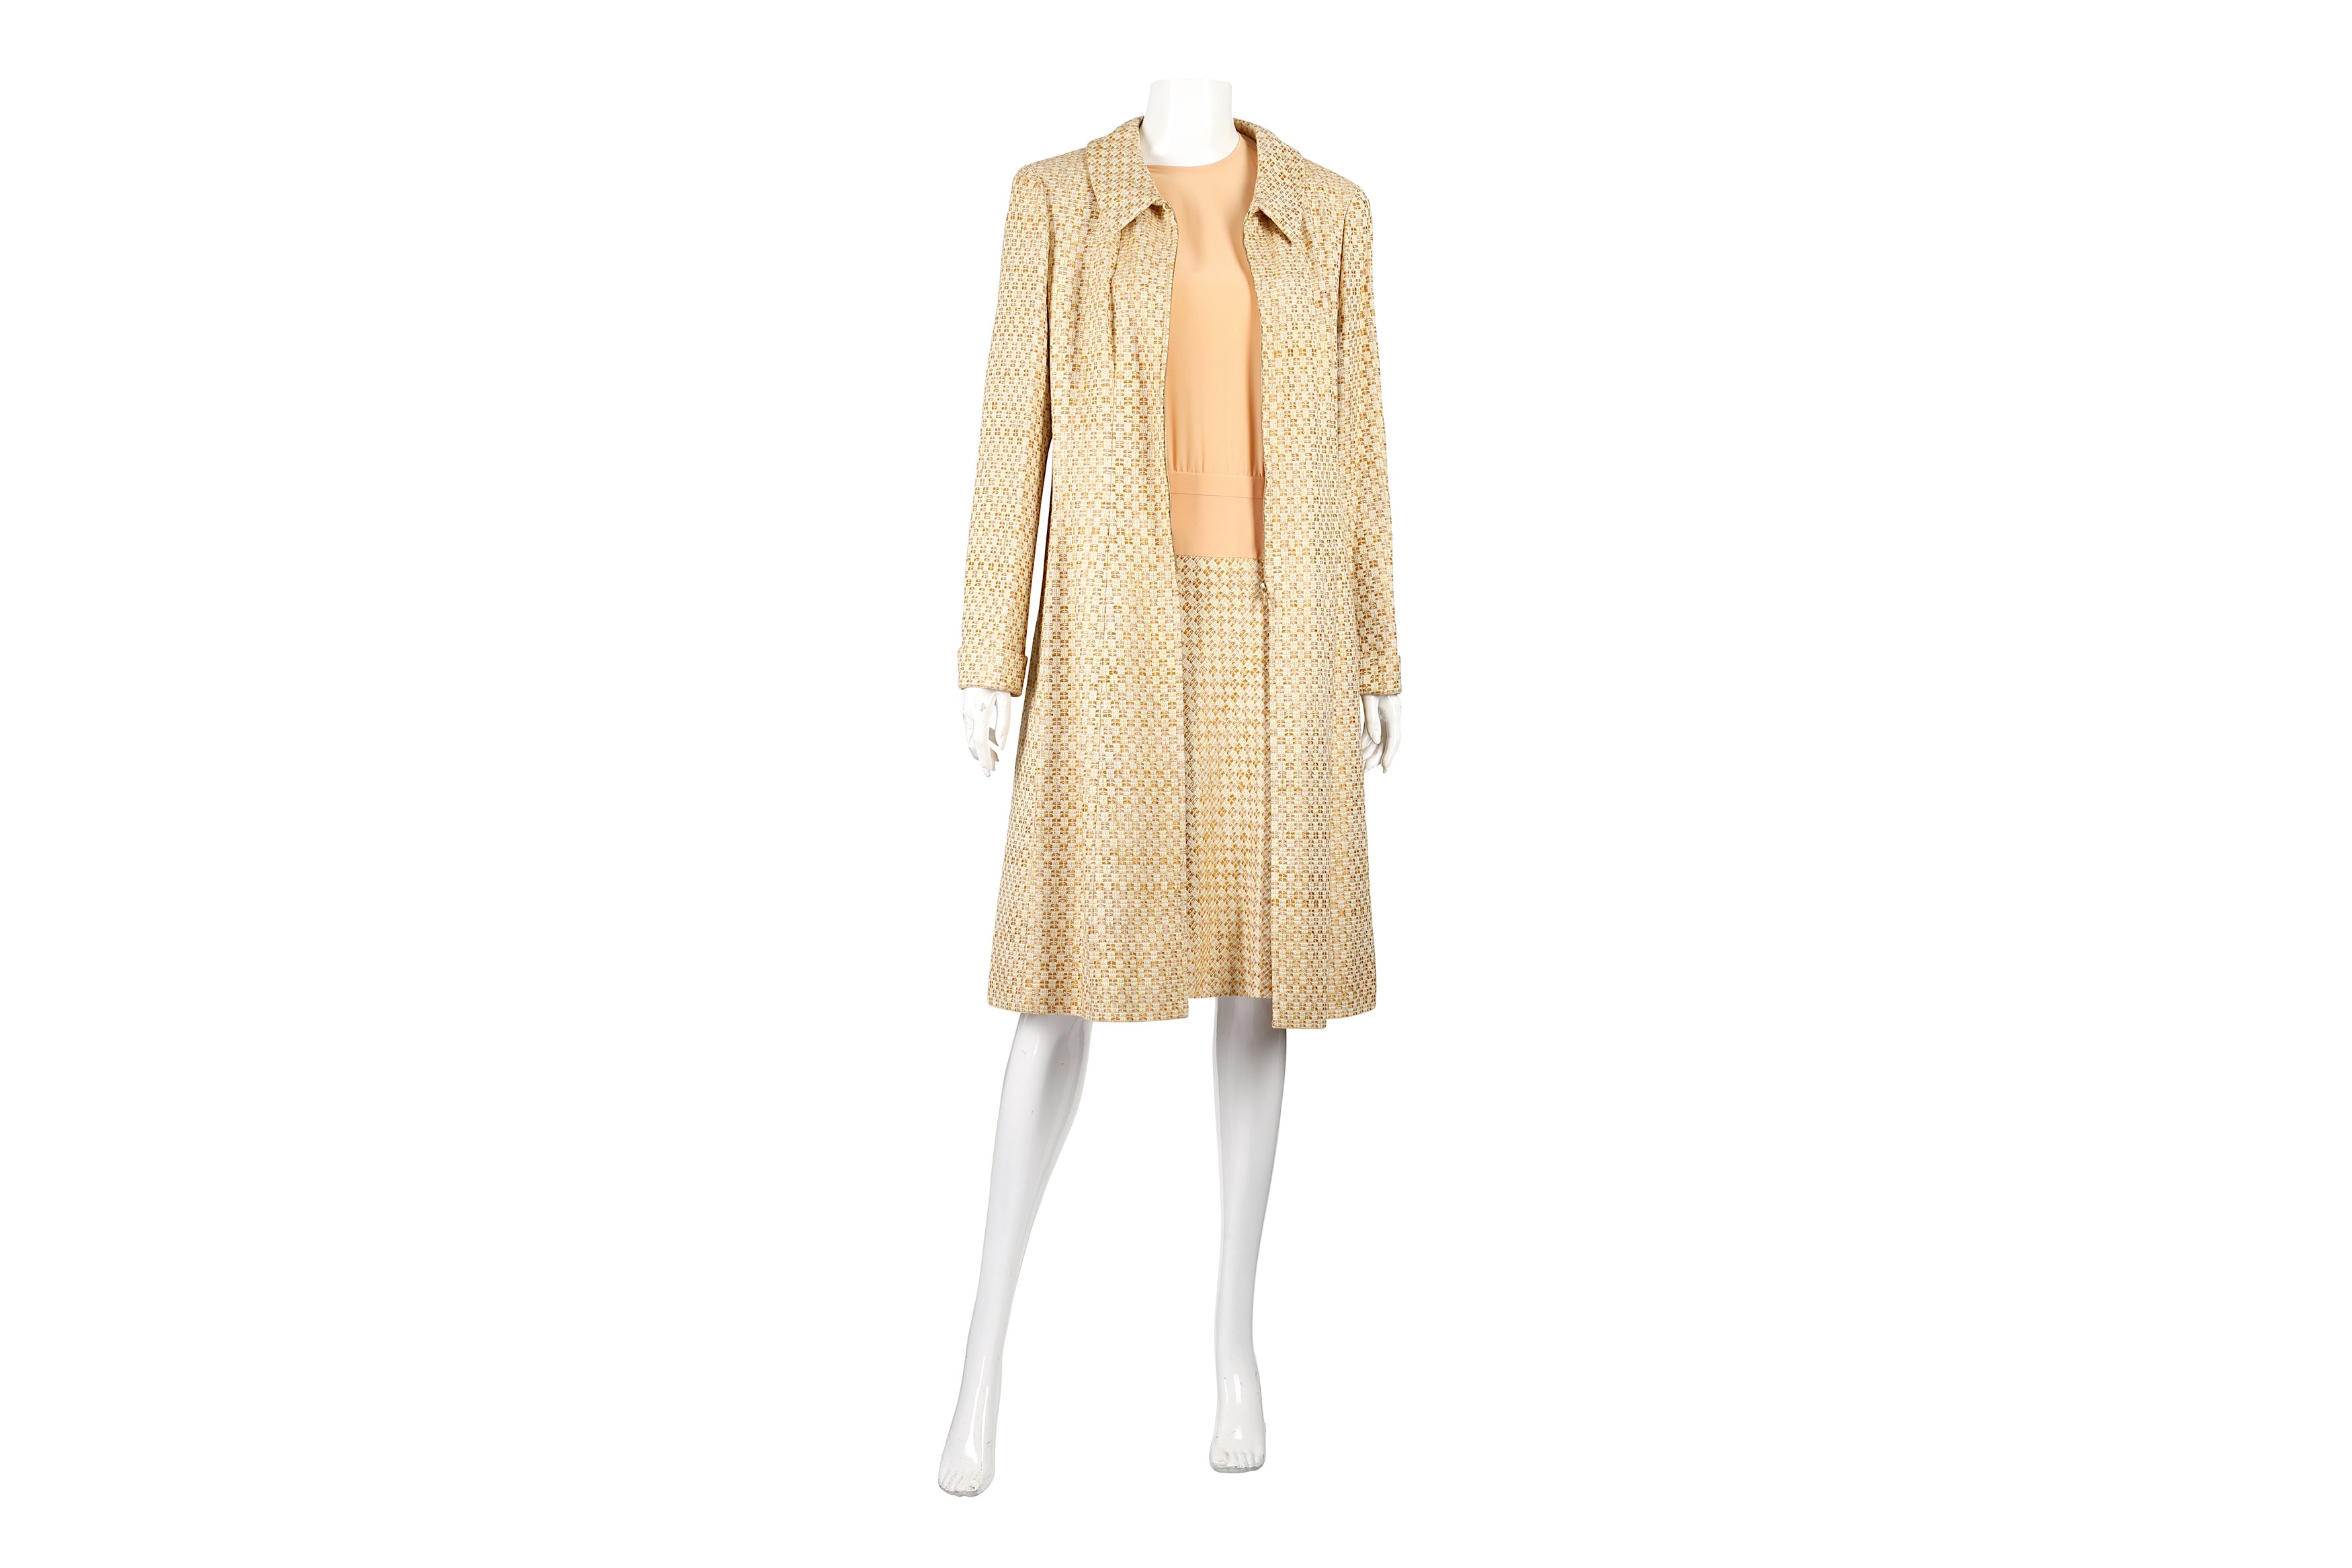 Chanel Honey Tweed Dress and Coat Suit - Size 42 - Image 2 of 8